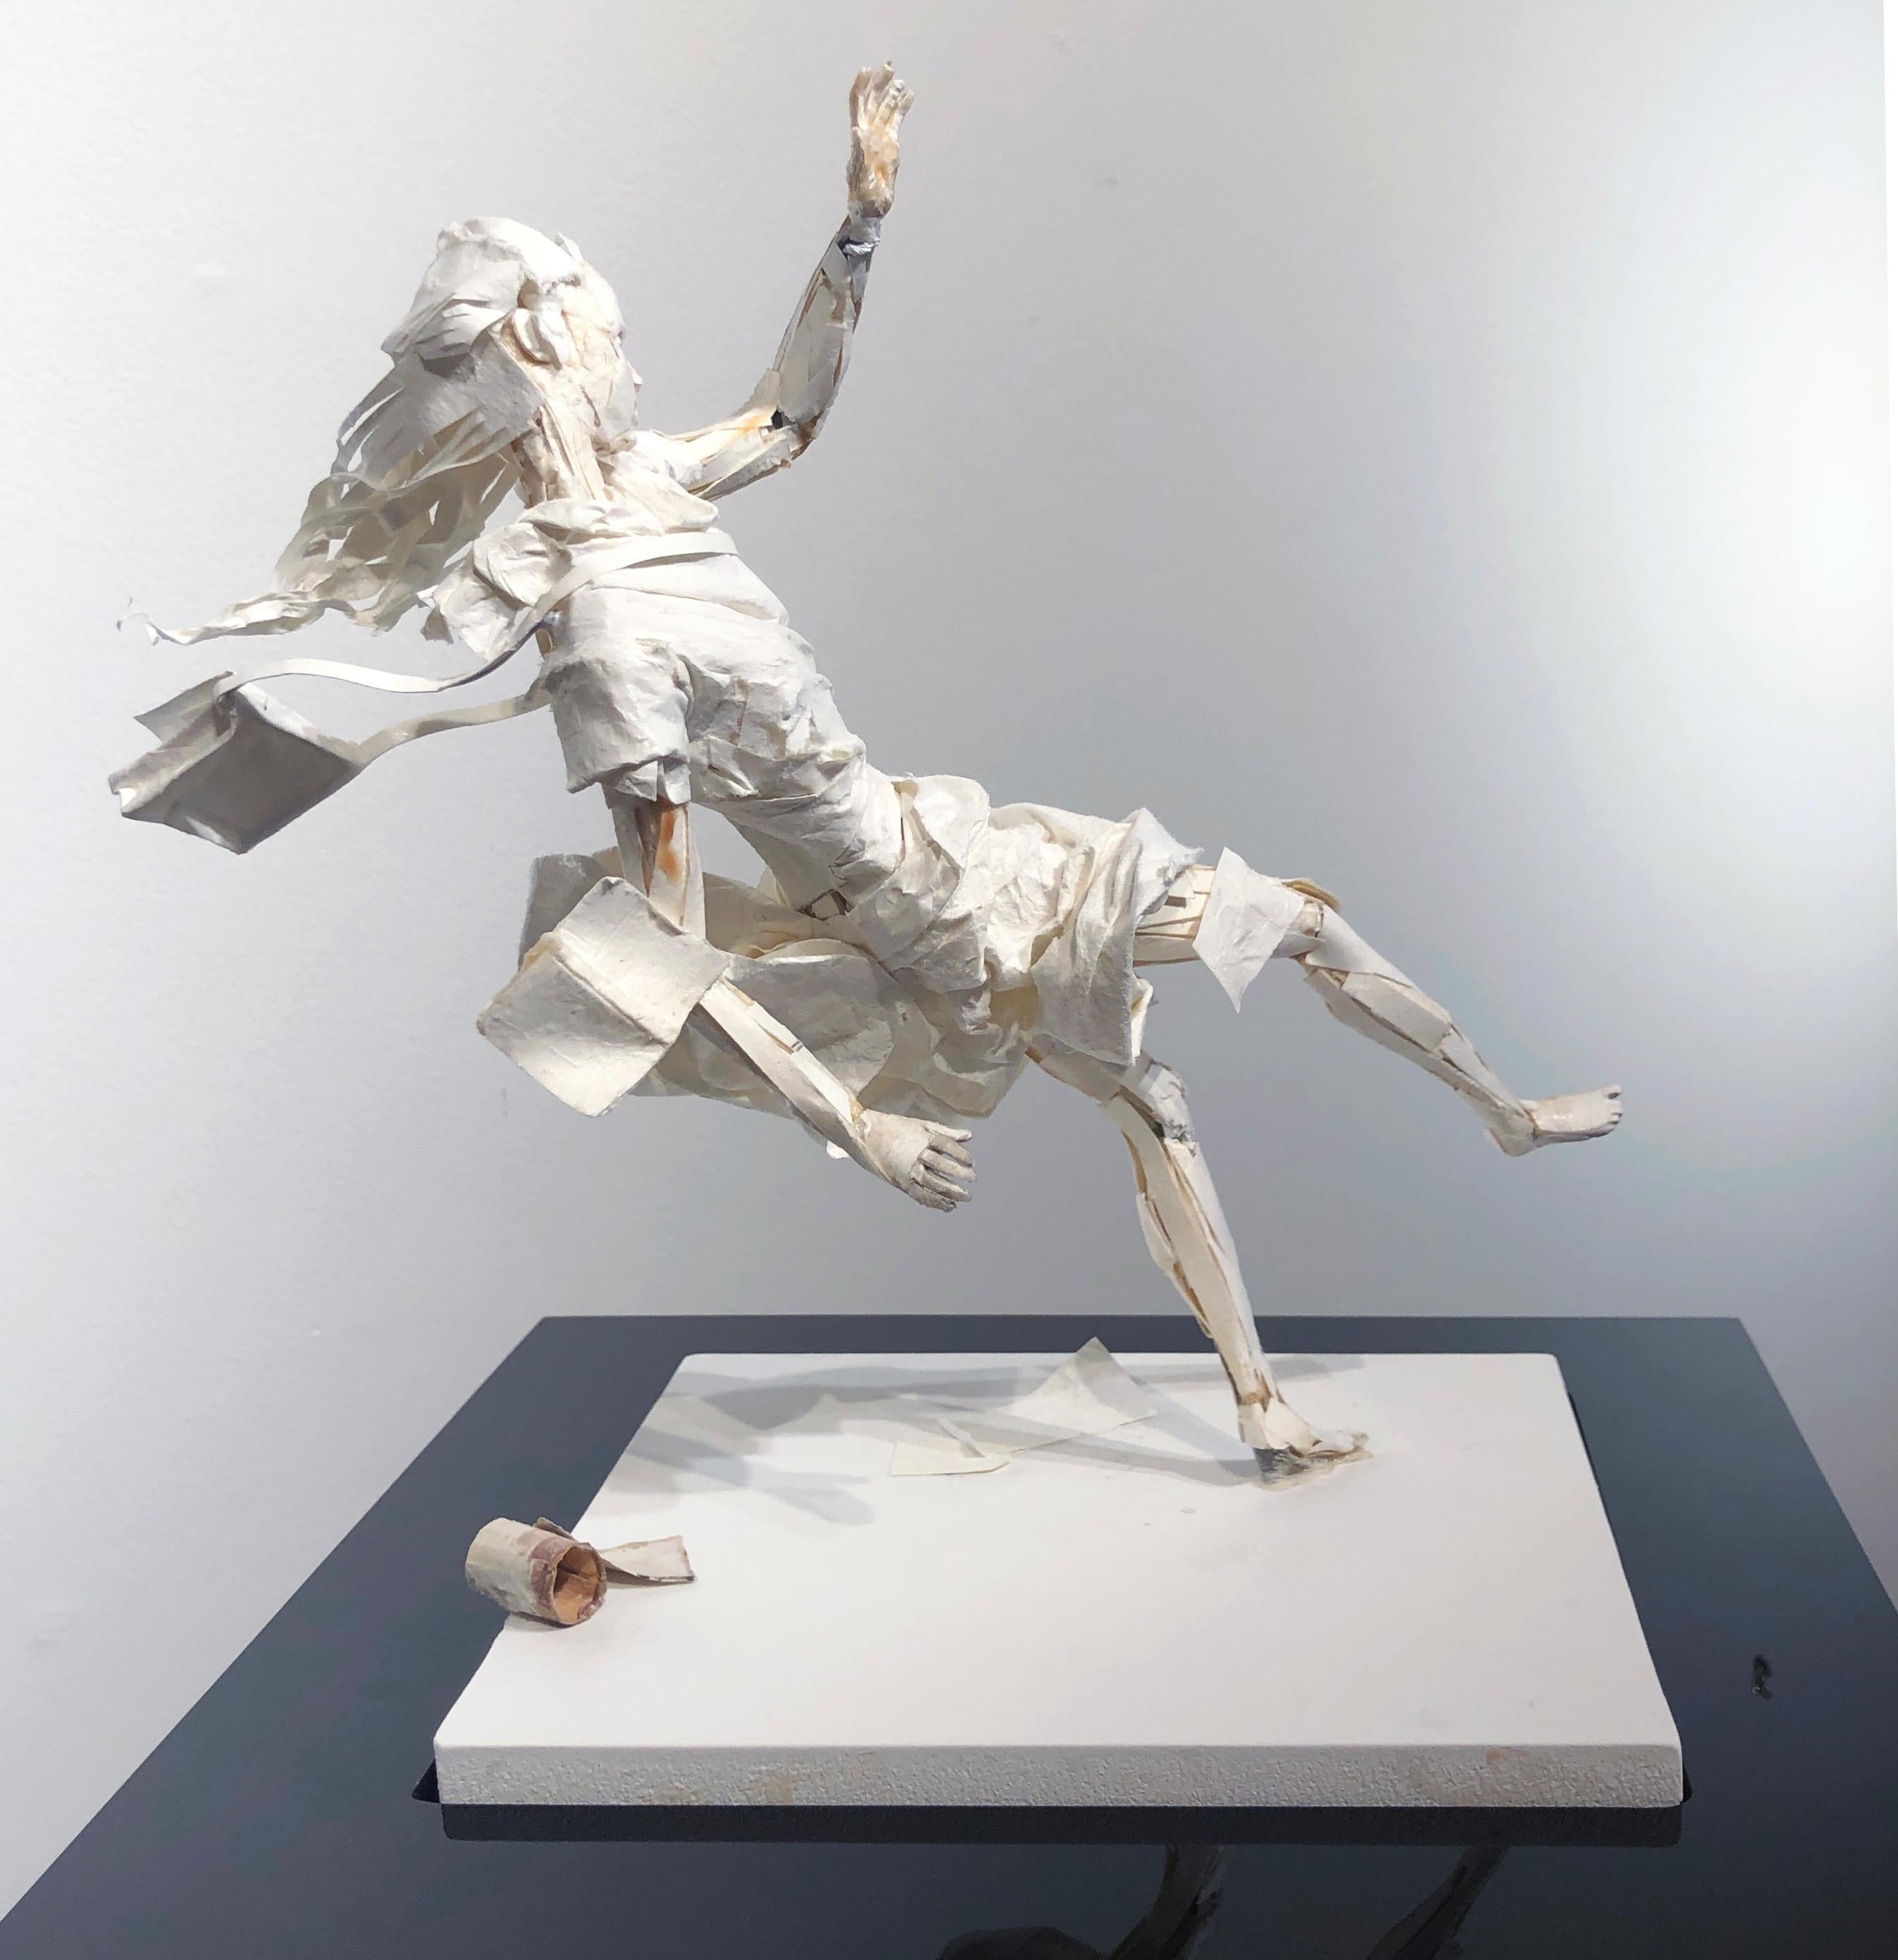 Ivan Markovic Figurative Sculpture - The East Wind Rises - Highly Detailed Paper Sculpture of Woman in a Wind Storm